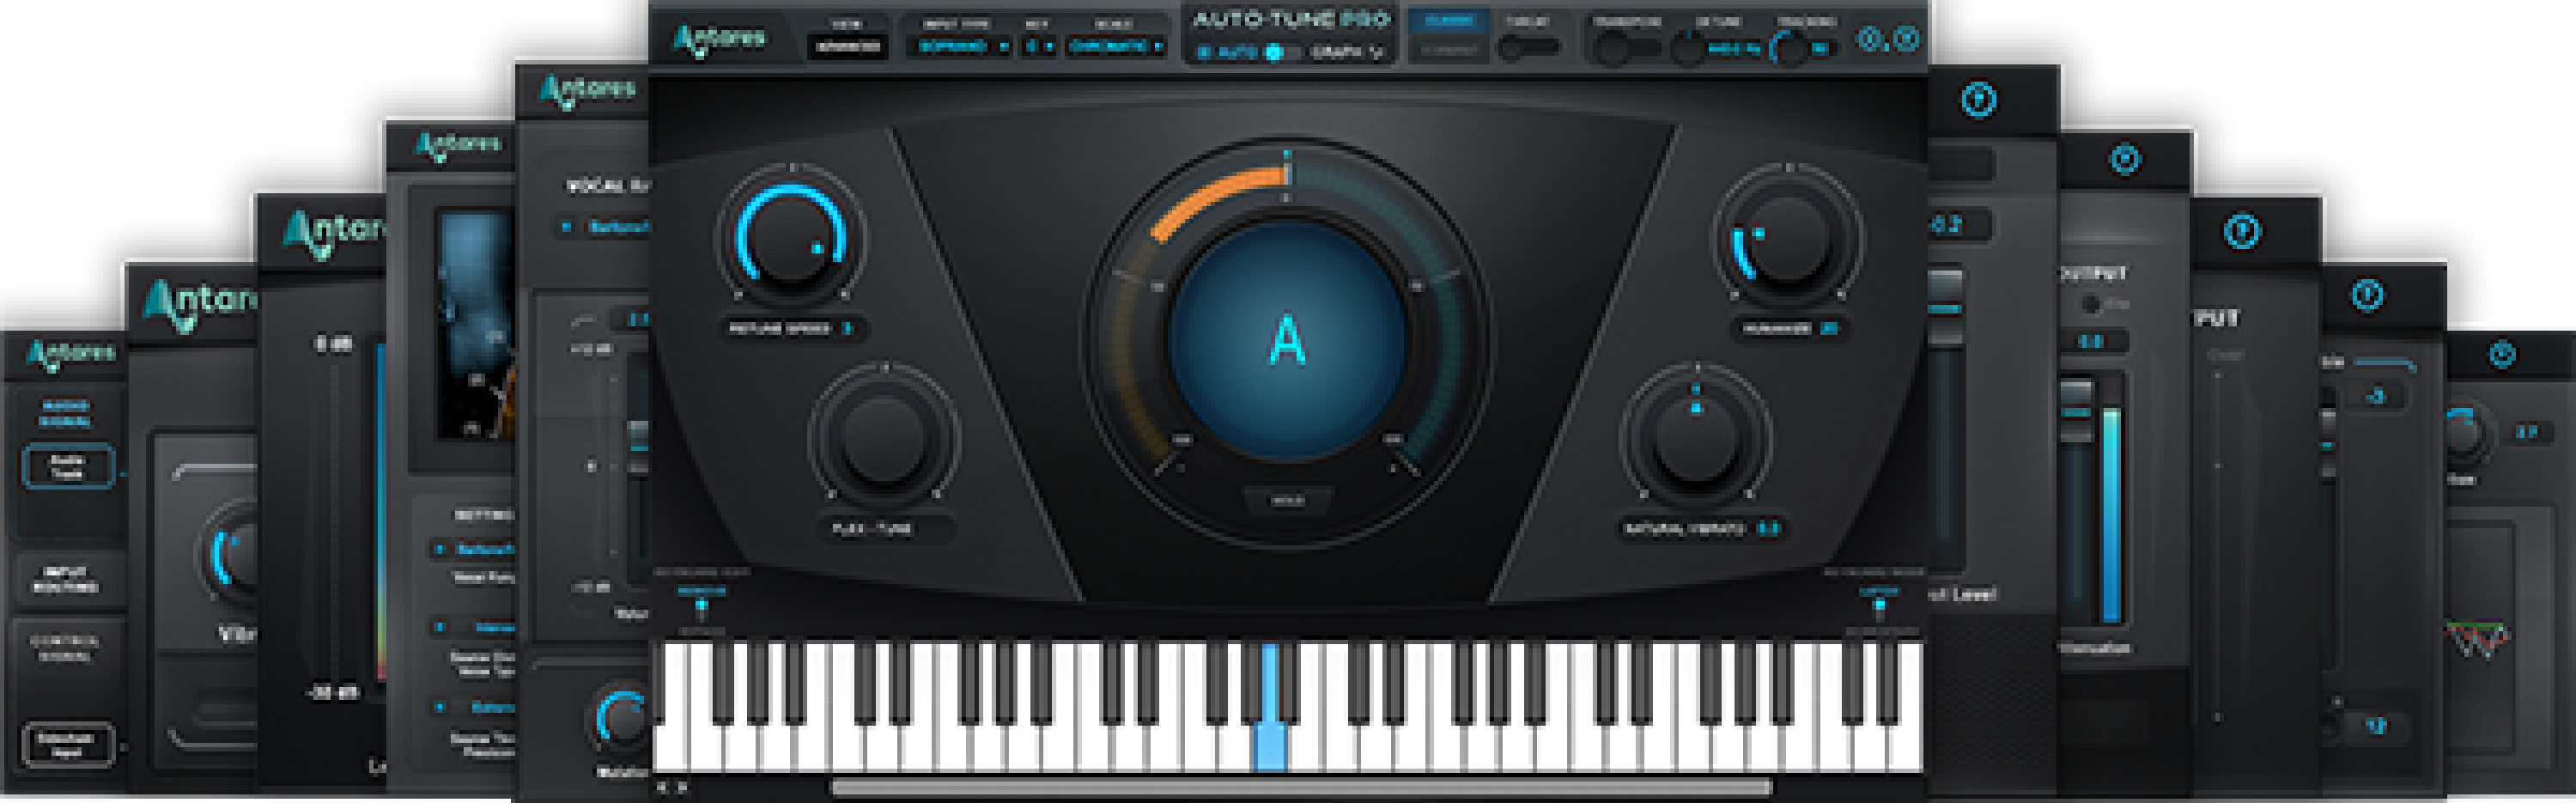 Introducing Auto Tune Essentials  Vocal Production. Simplified 